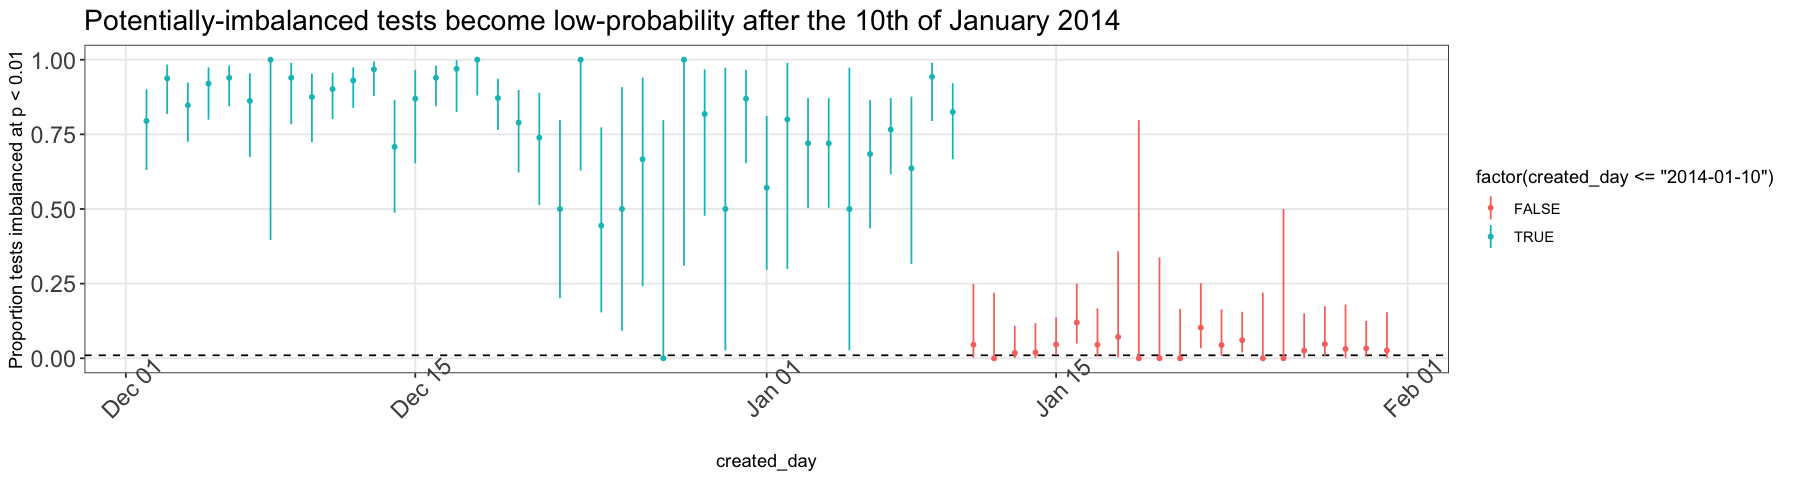 Potentially-imbalanced tests became low-probability after the 10th of January 2014